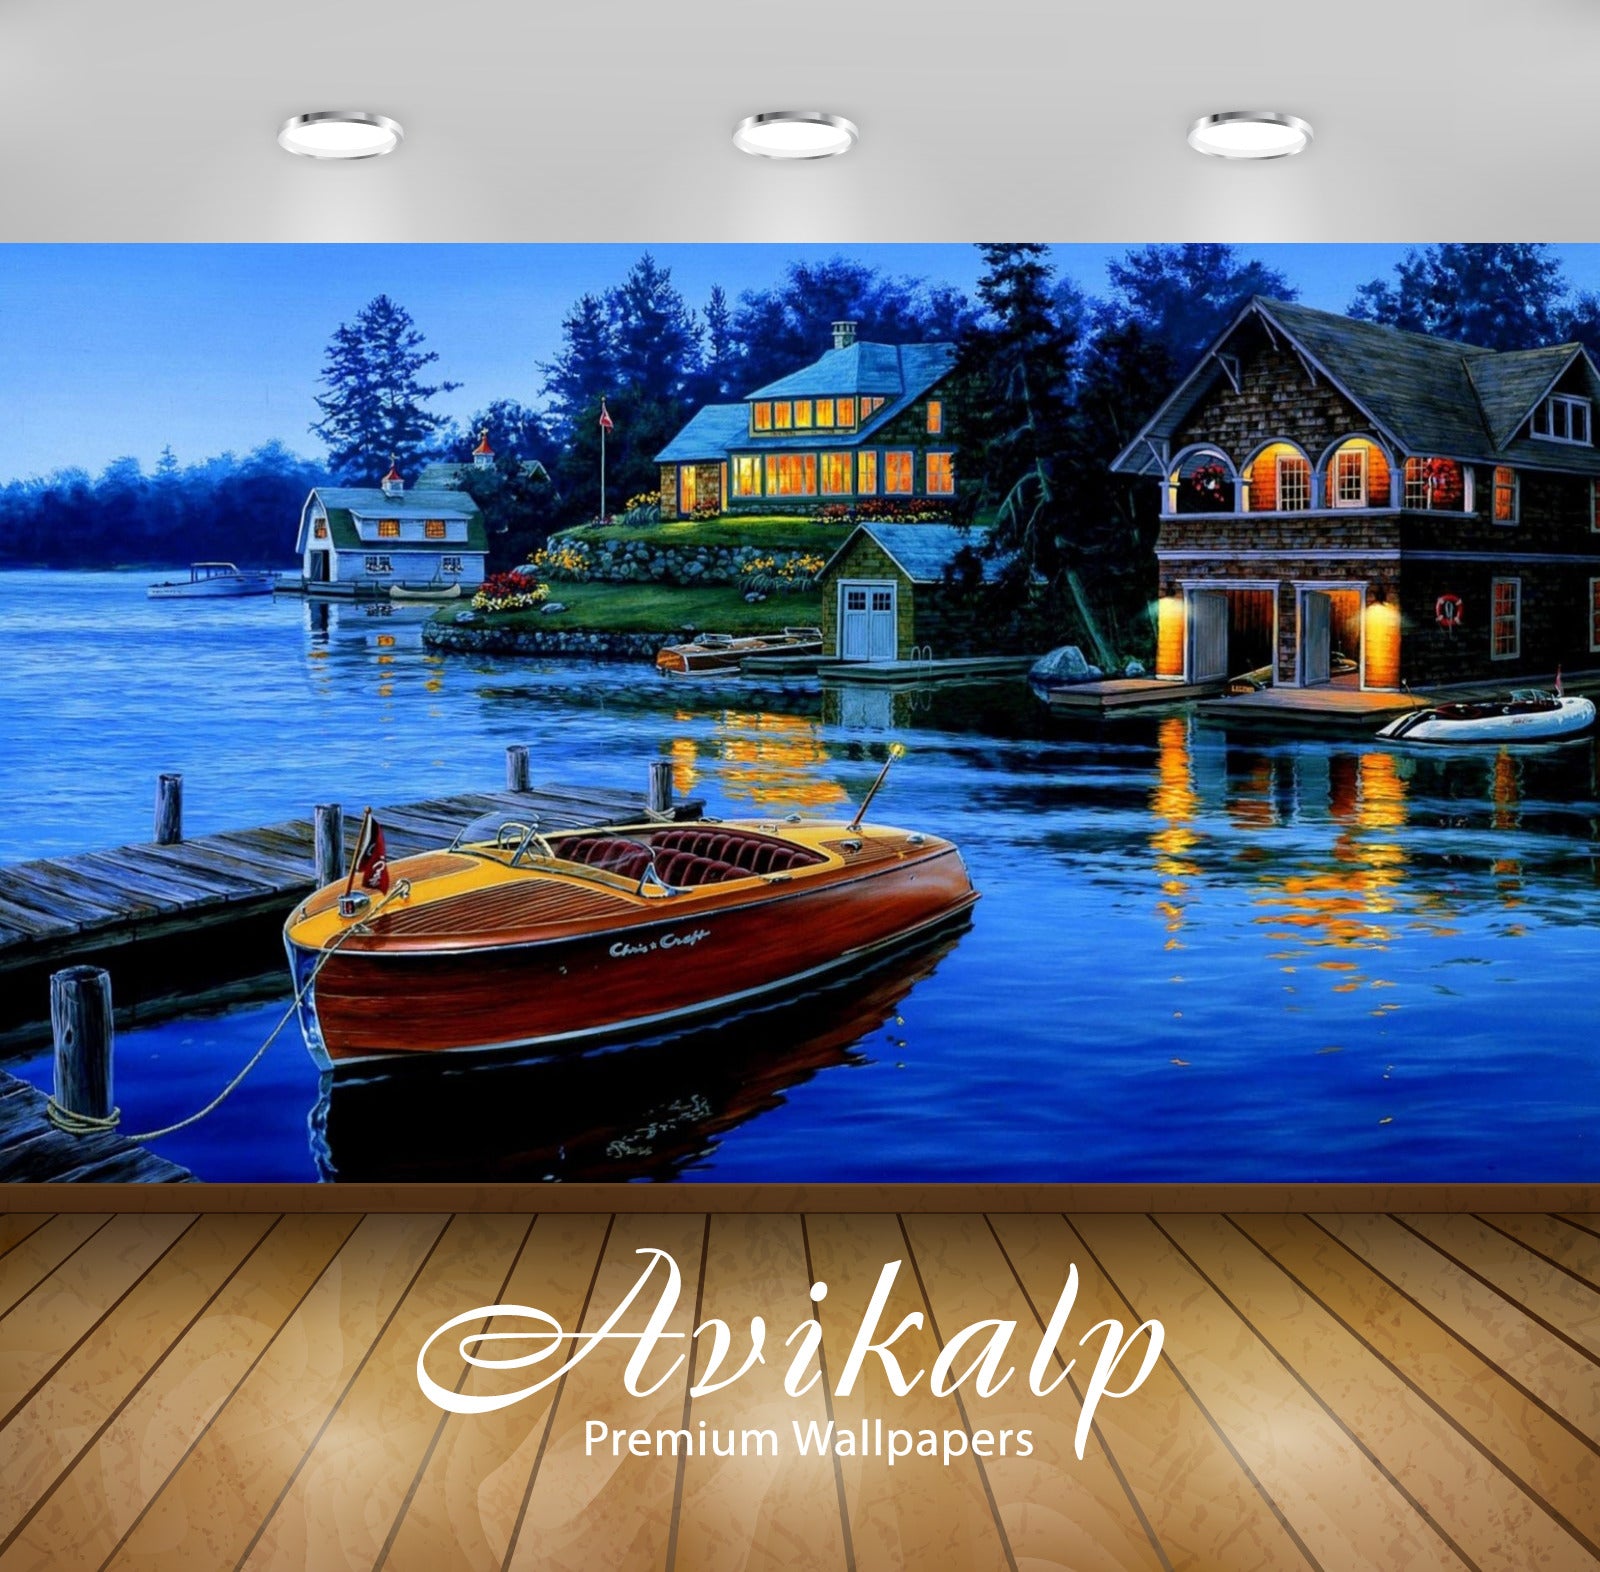 Avikalp Exclusive Awi2727 Houses Lake Boat Art Full HD Wallpapers for Living room, Hall, Kids Room,